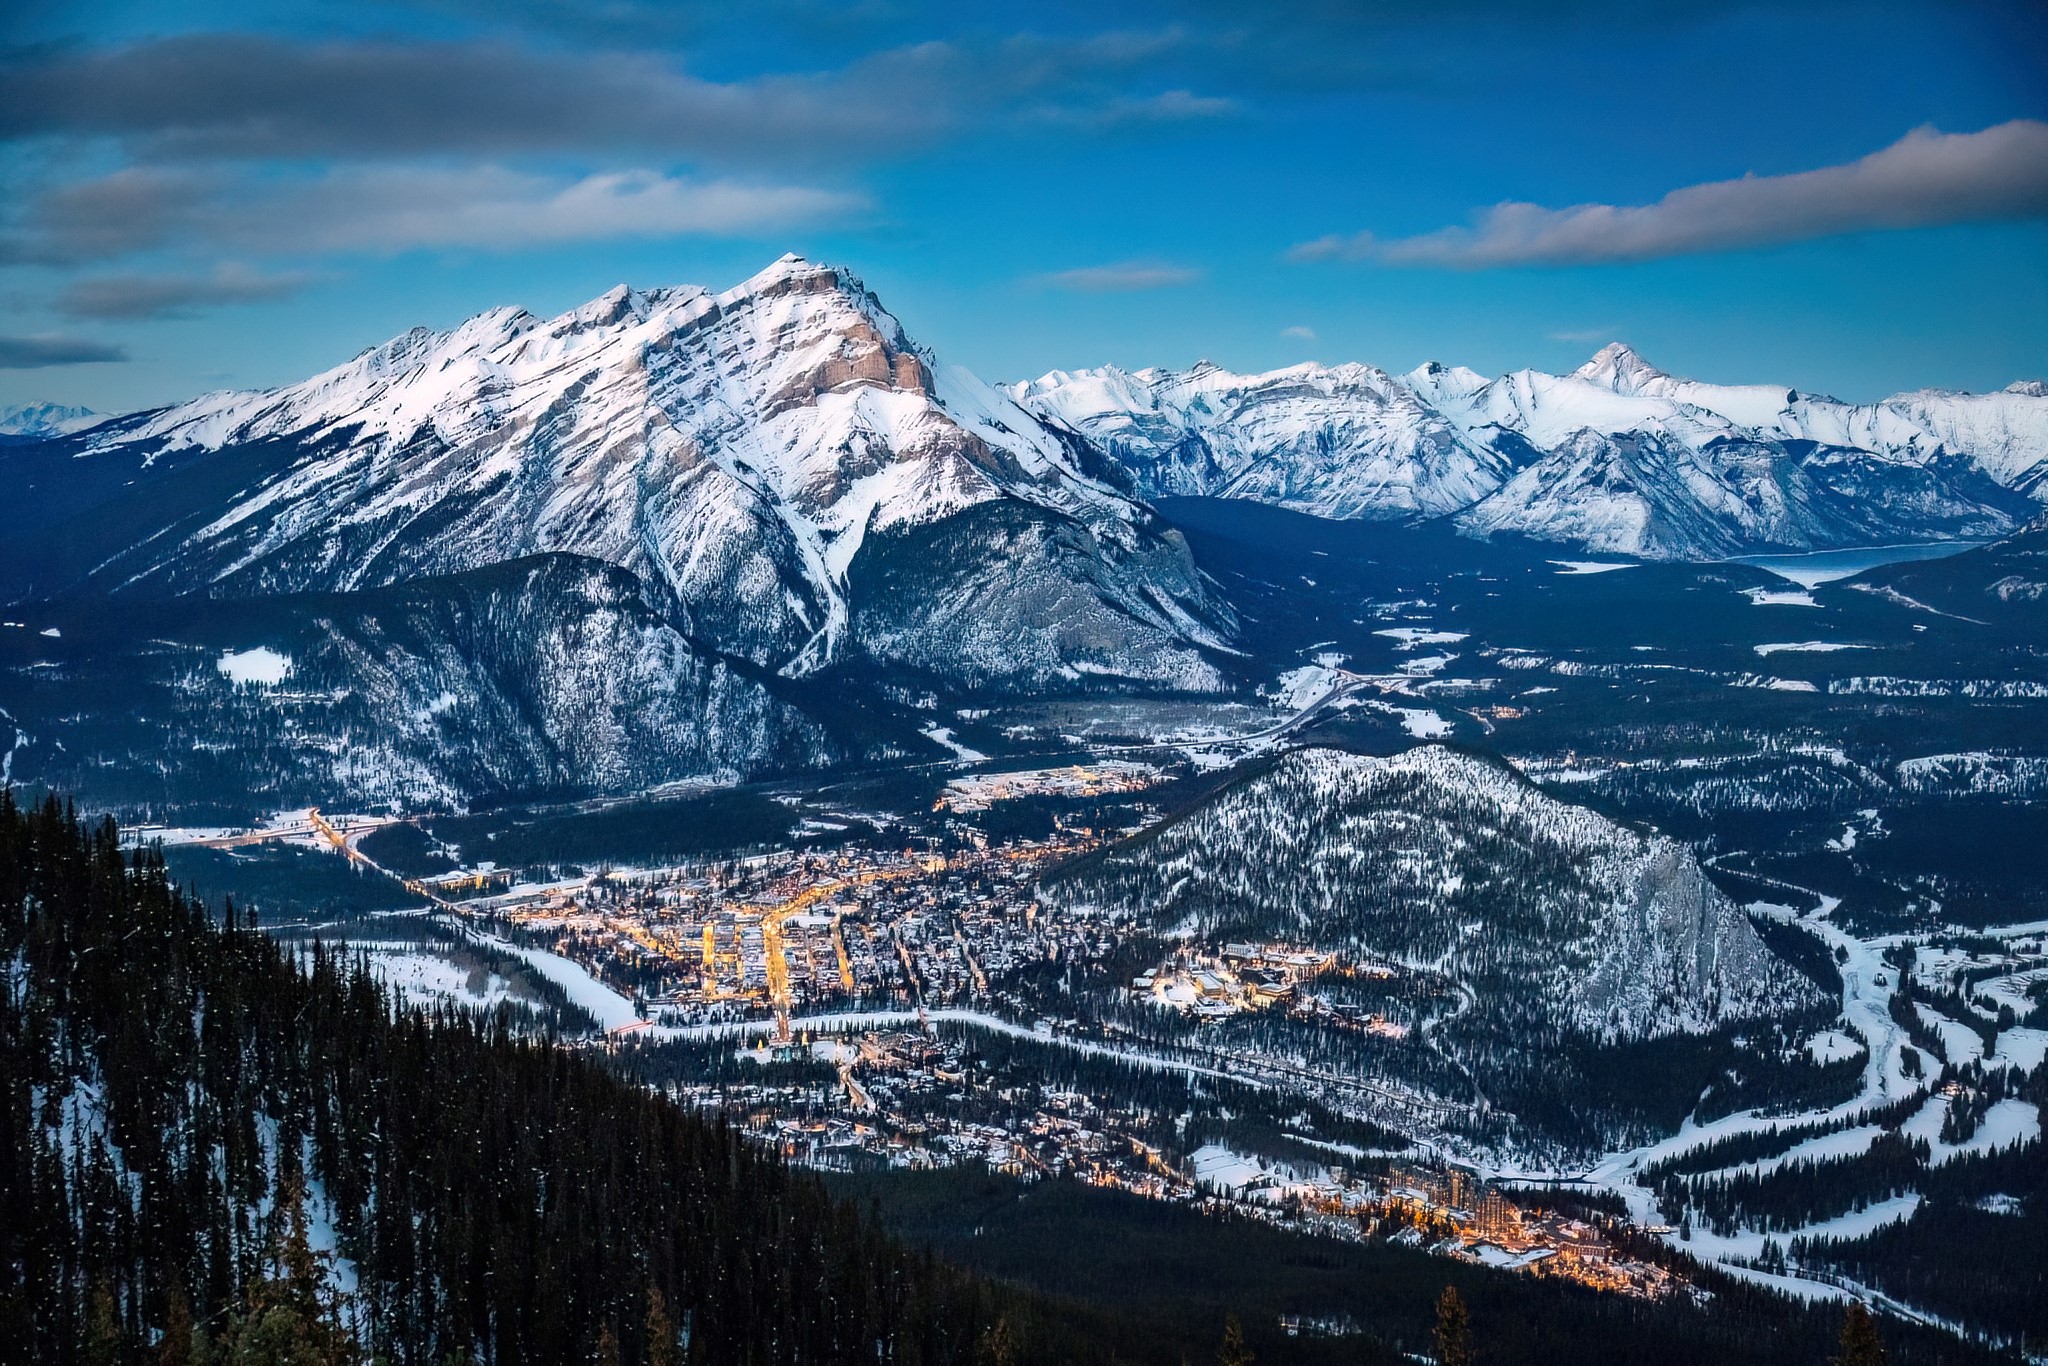 A snow covered Banff is seen from the Sulphur Mtn Gondola above the town to the South-West. It's a cool blue evening and